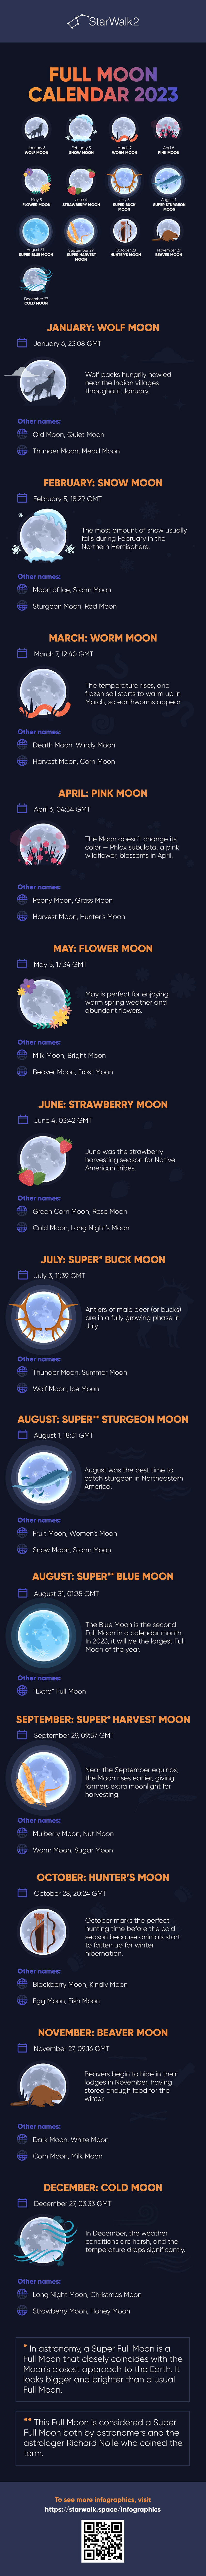 Full Moons 2023 Infographic